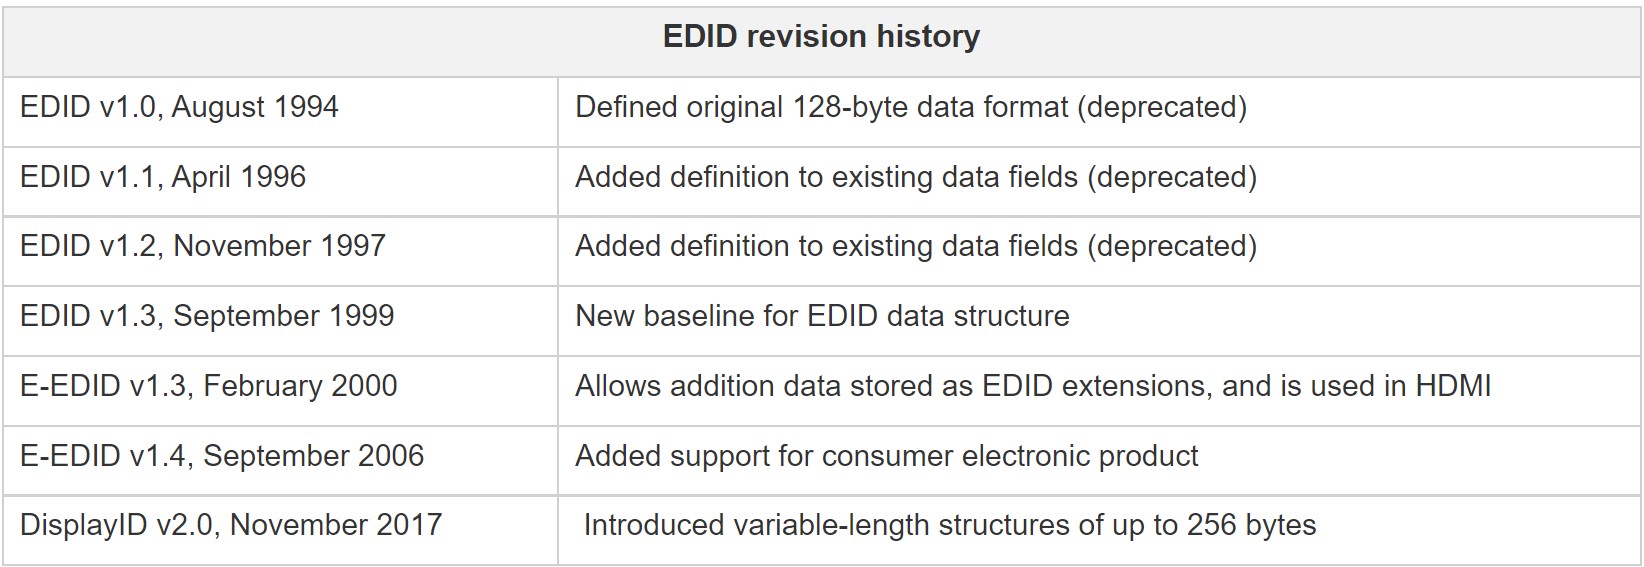 EDID revision history overview